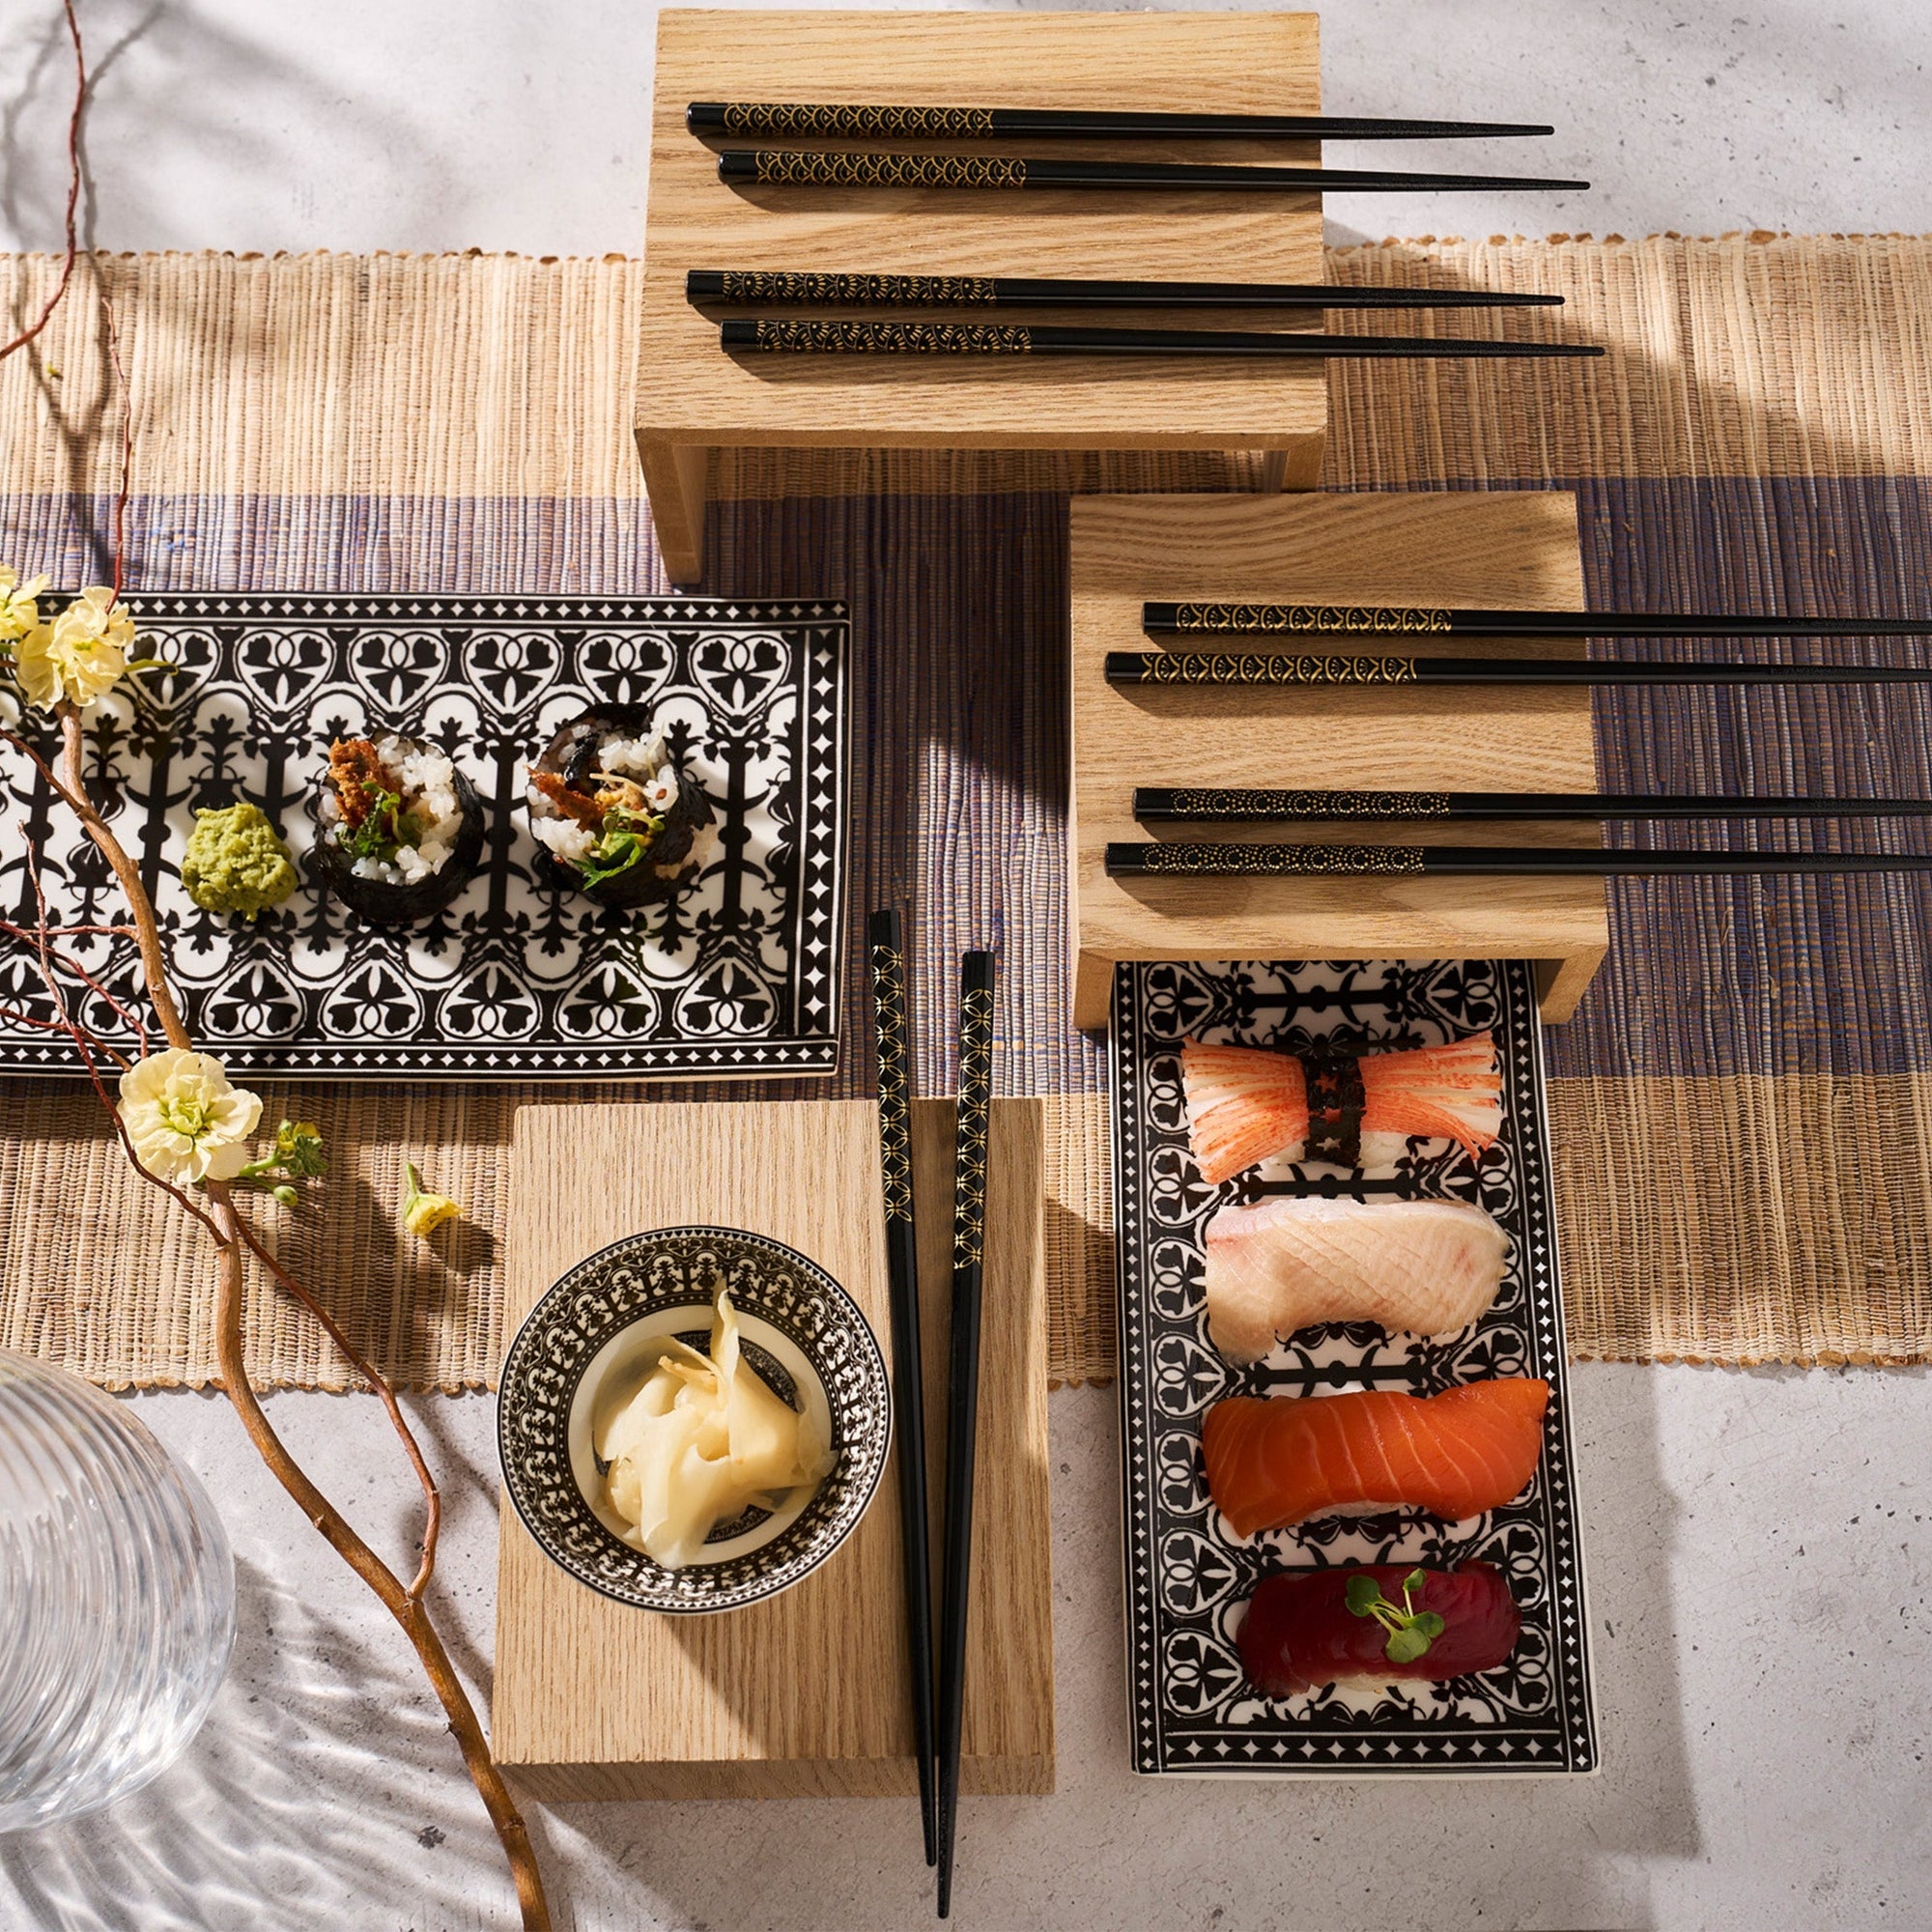 Two rectangular bone china trays with intricate black-and-white ornamental patterns, featuring symmetrical designs of hearts, swirls, and geometric shapes. These hand-decorated Casablanca Medium Sushi Trays, Set of 2 by Caskata add elegance to any table setting.